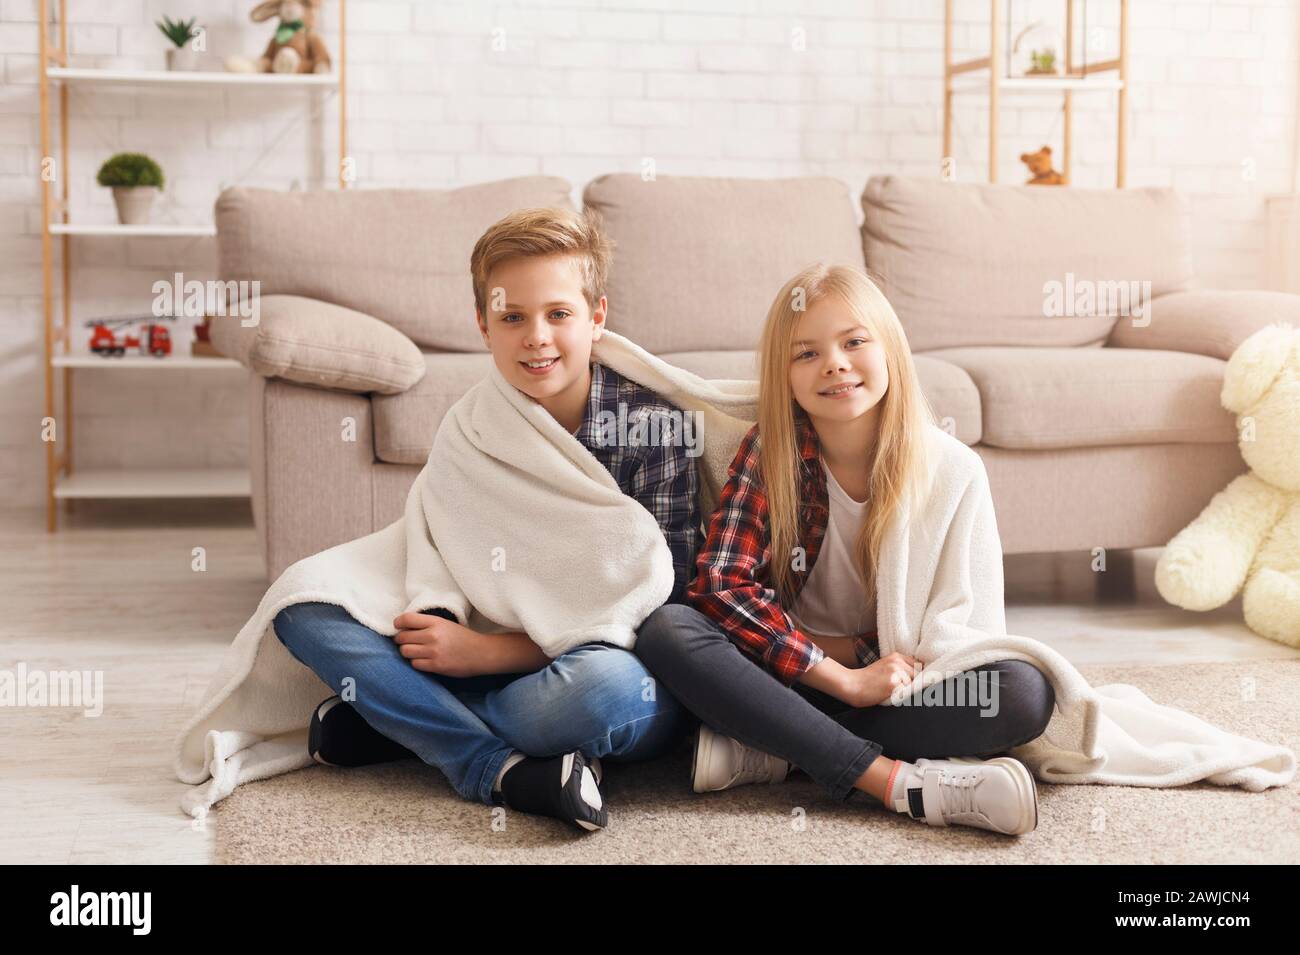 Cute Brother And Sister Covered With Blanket Sitting On Floor Stock Photo